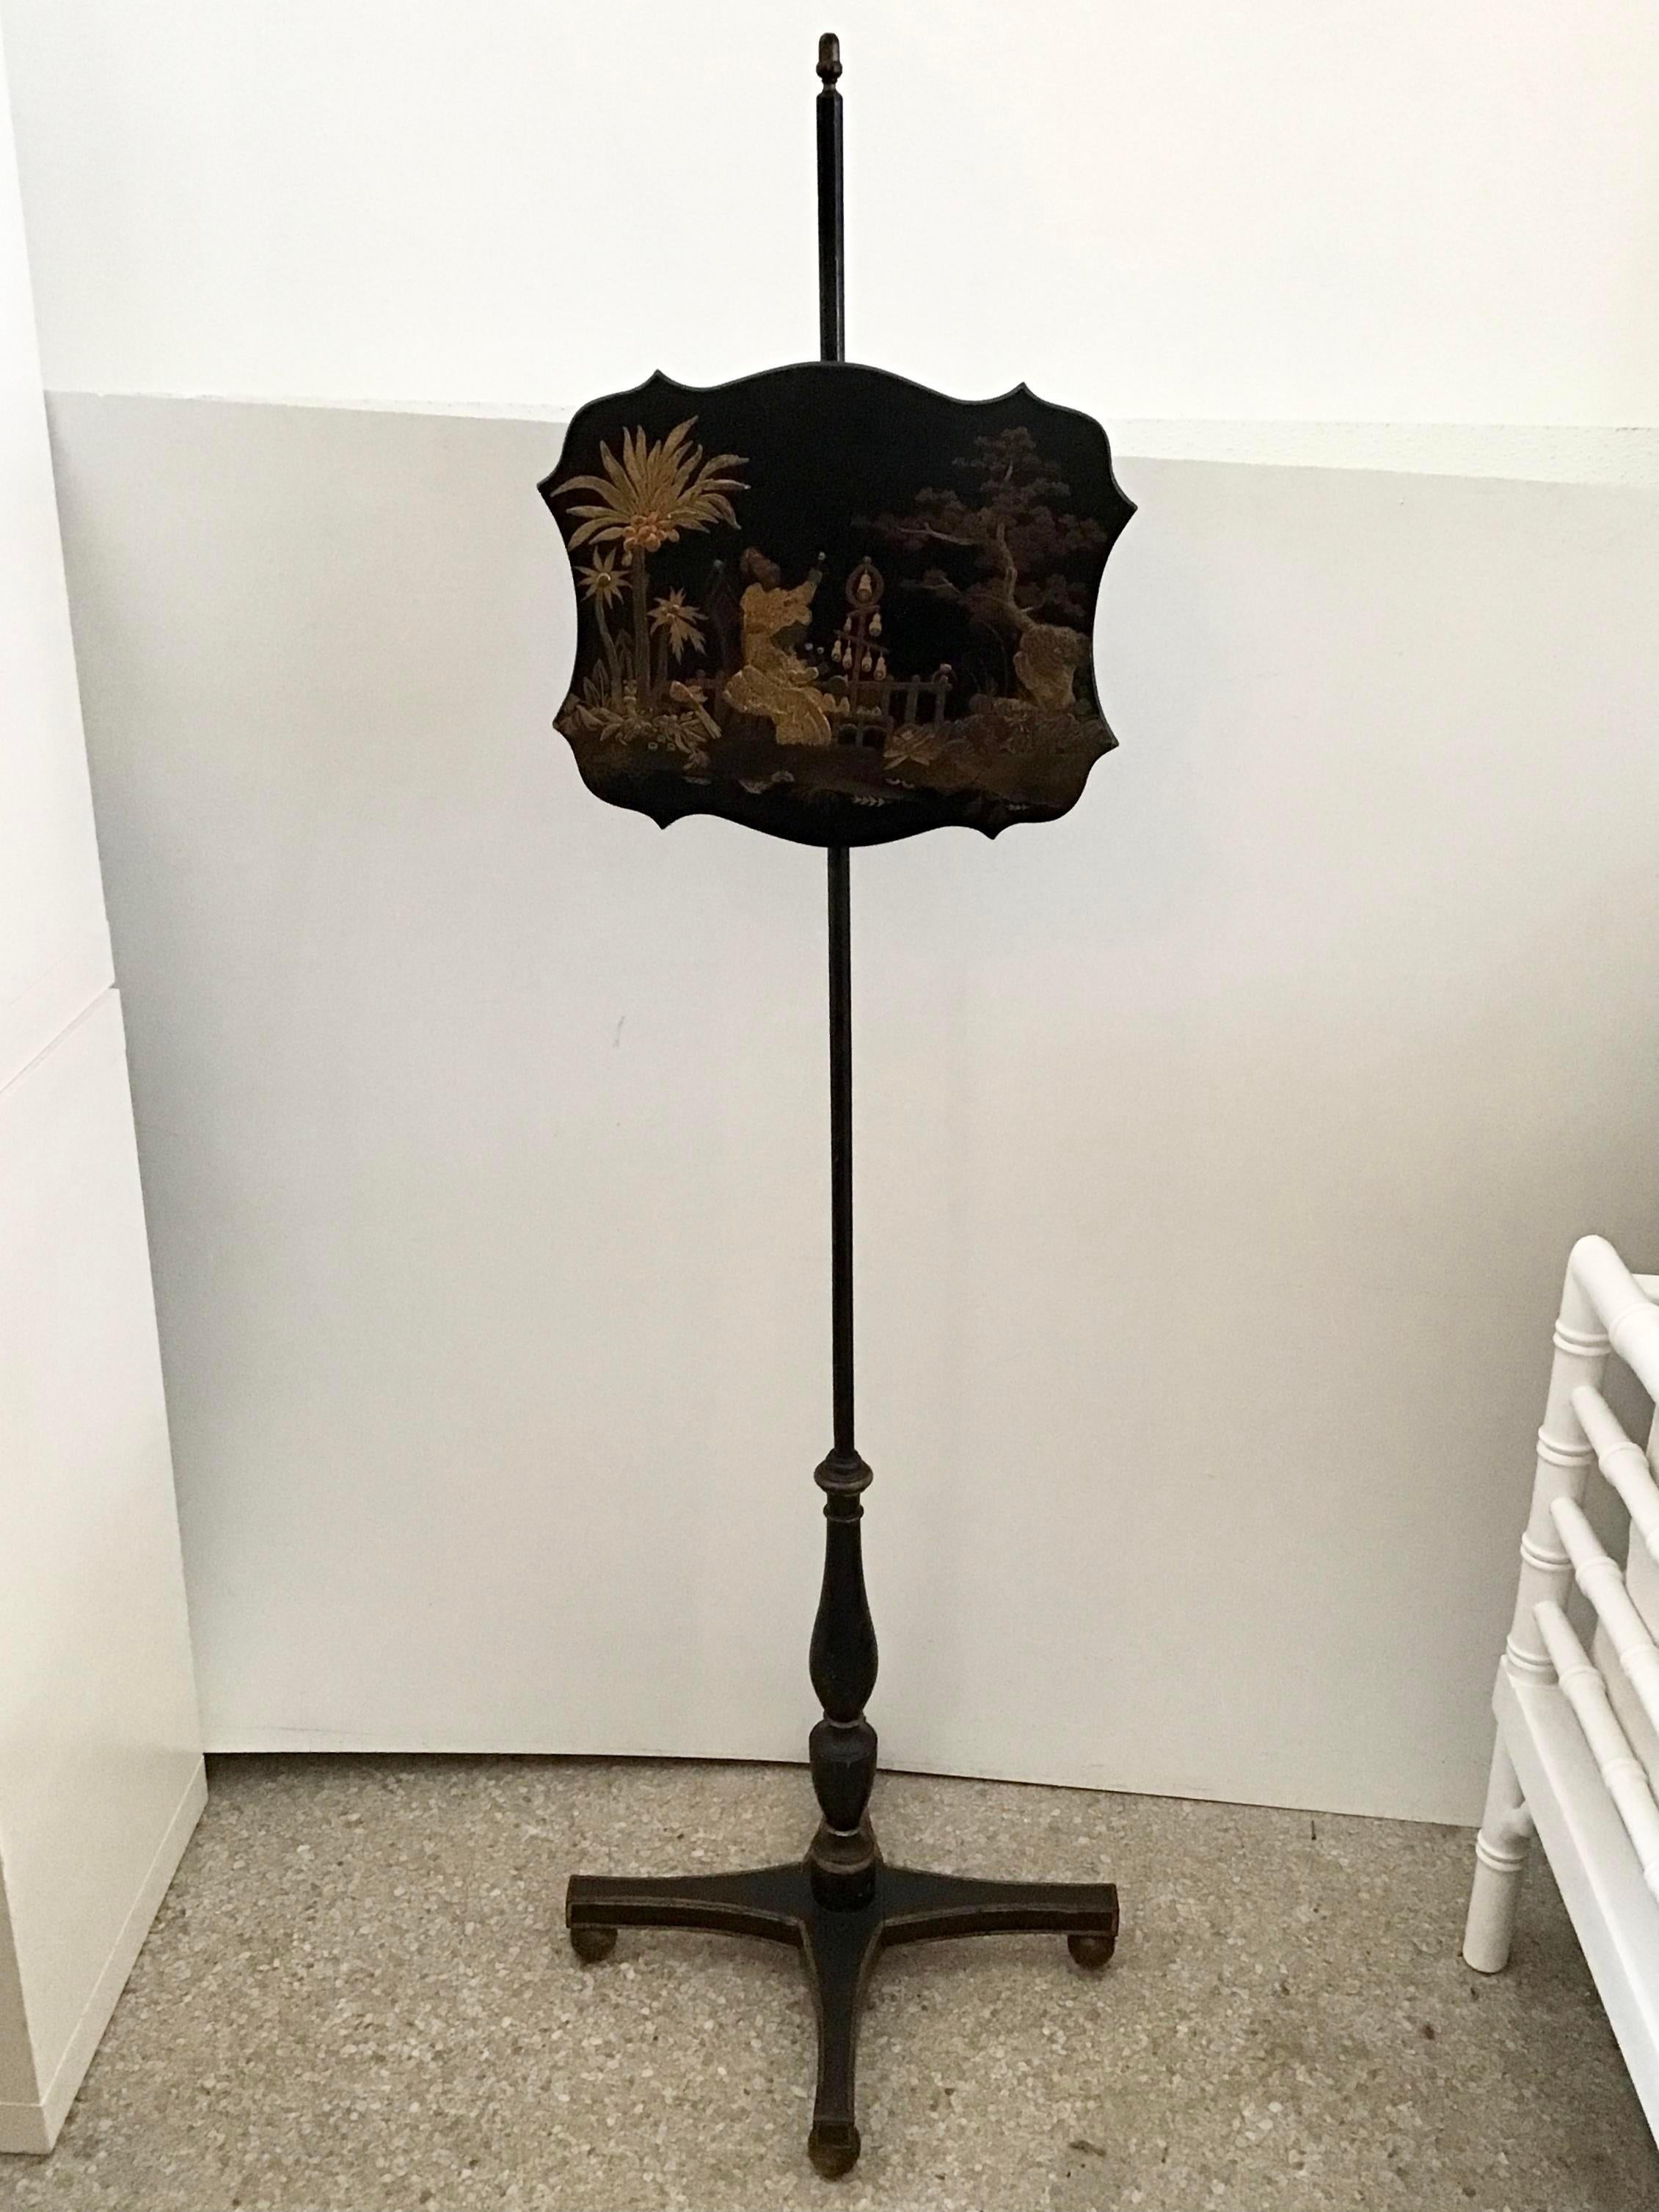 Beautiful Chinoiserie French Fireplace screen decorative art stand. This screen was original crafted to set next to a chair next to a fireplace to keep the direct heat off of your face. The piece includes a painting of an Asian life scene in gold.